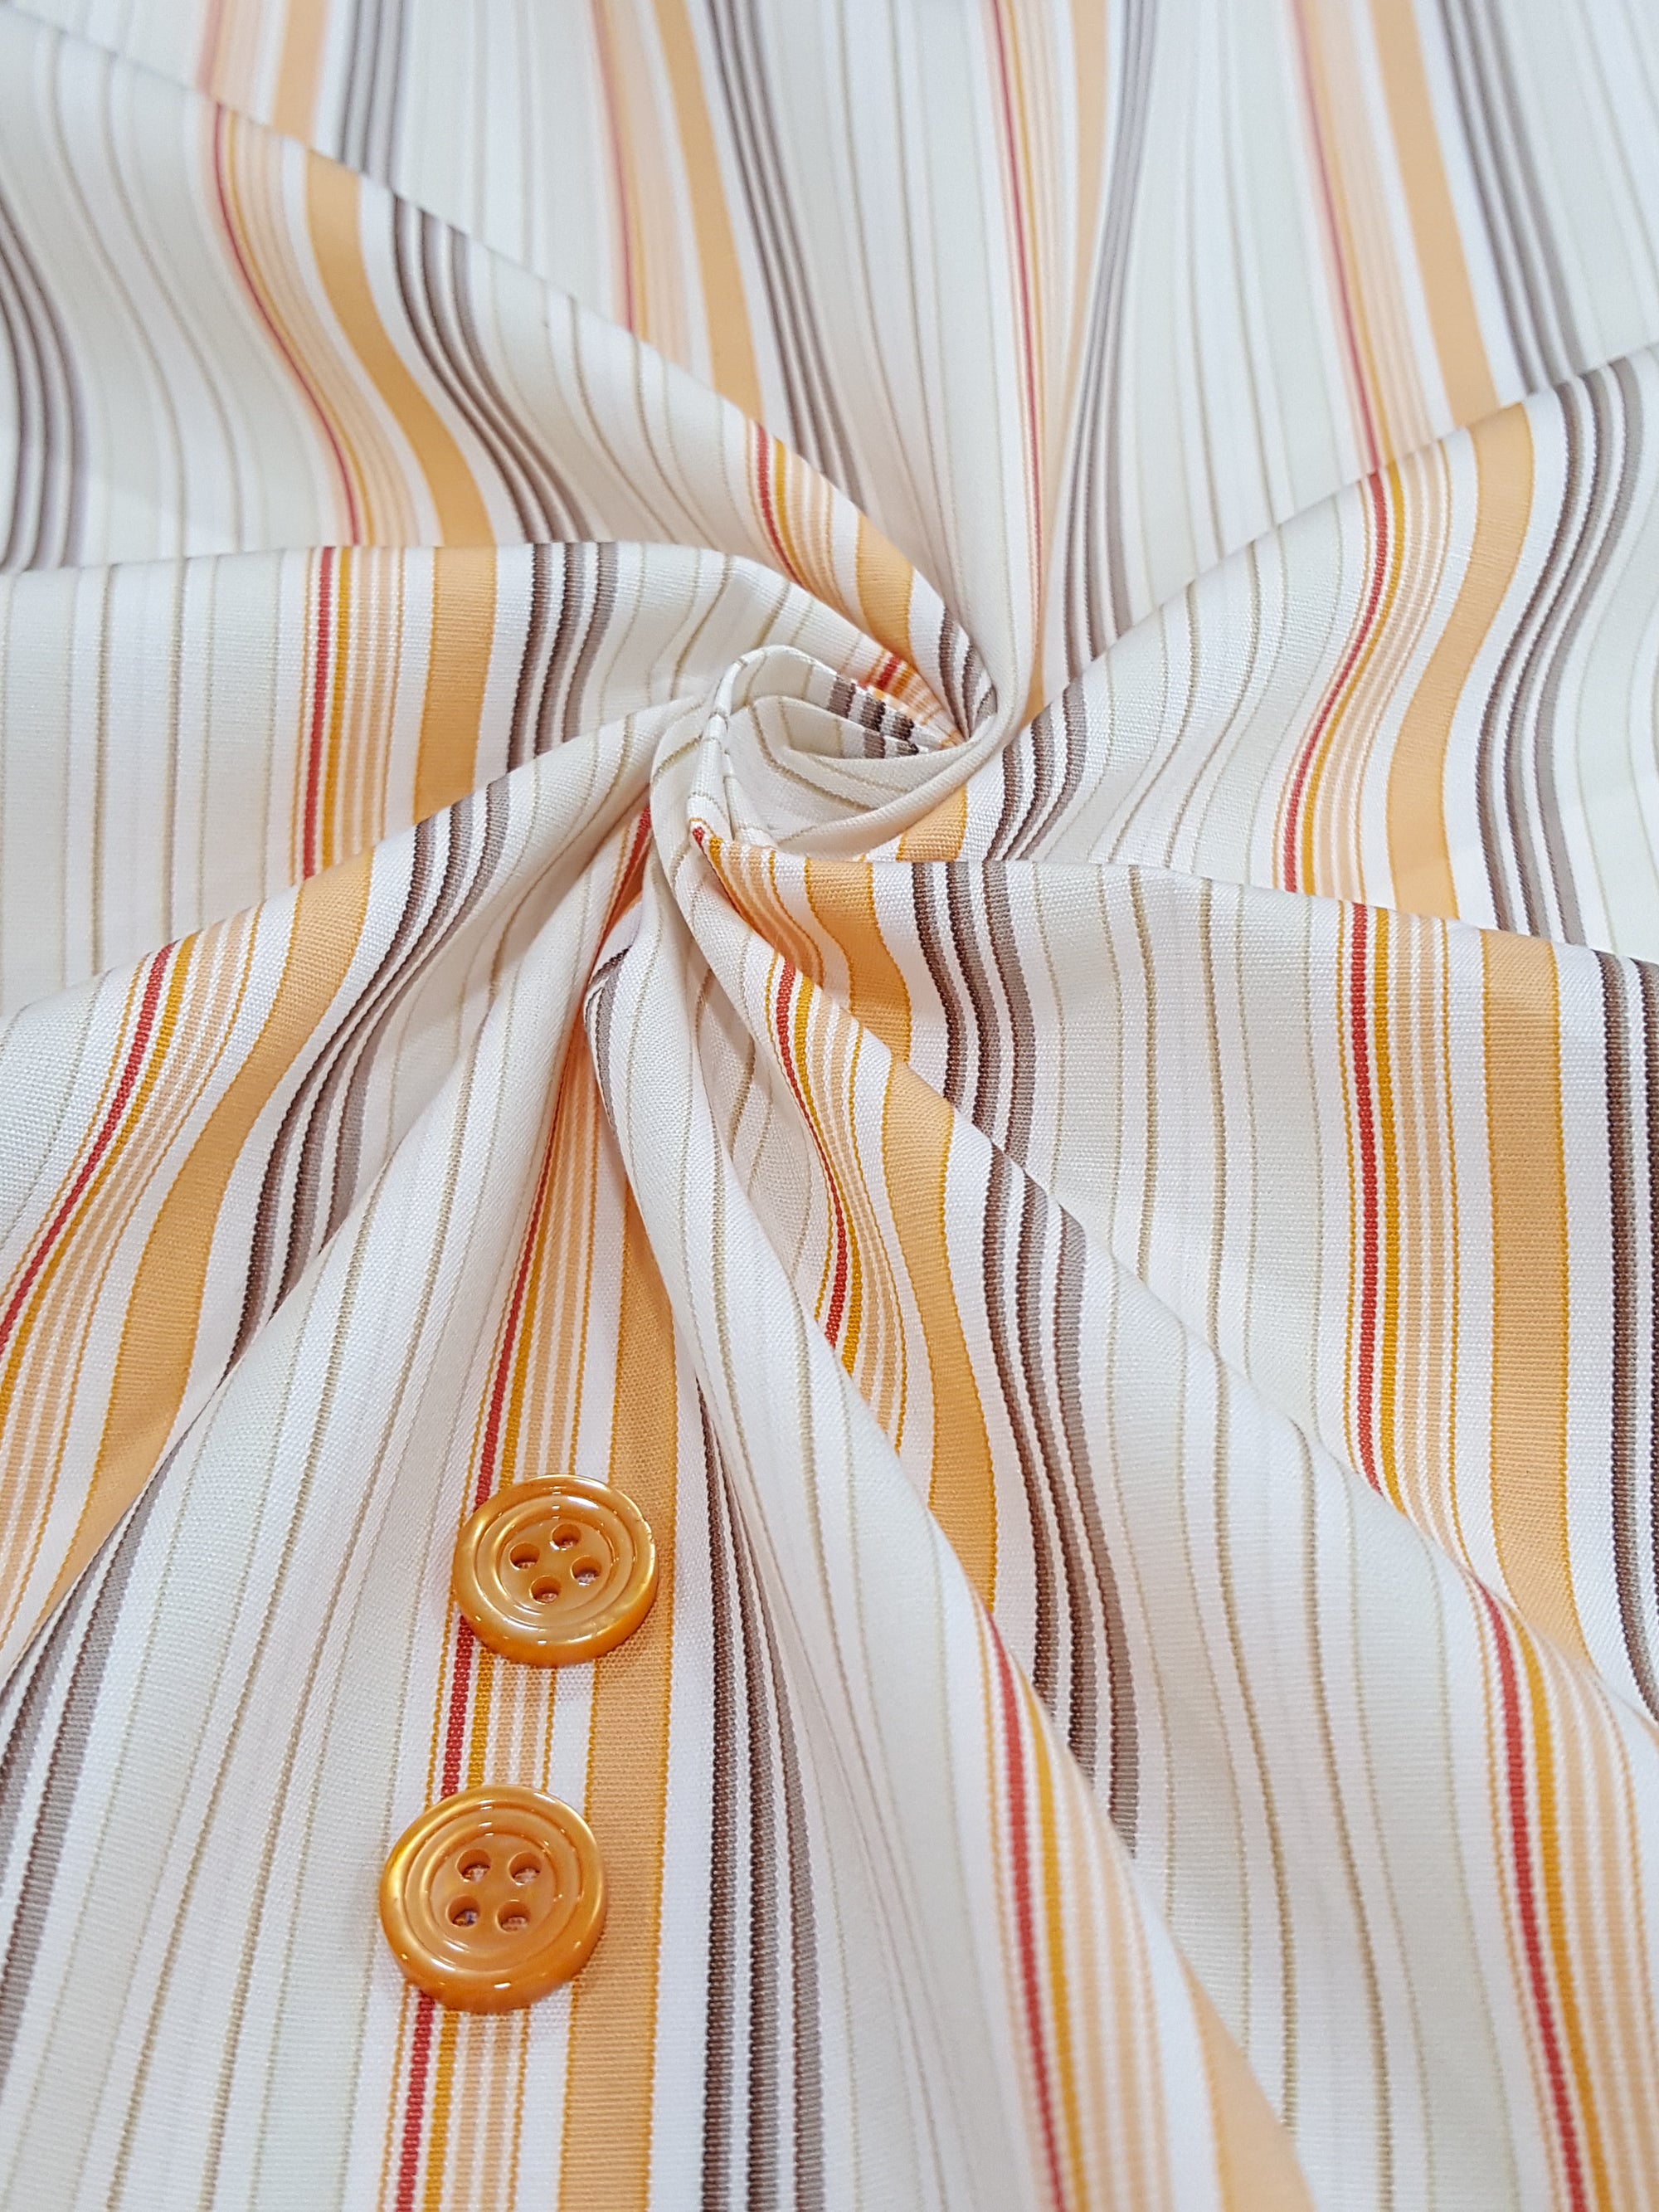 HUBERROSS 100's by 100's 2 plys Poplin Cotton 100% Egyptian Cotton Cloth Made in Italy  Width: 58'' / 150cm